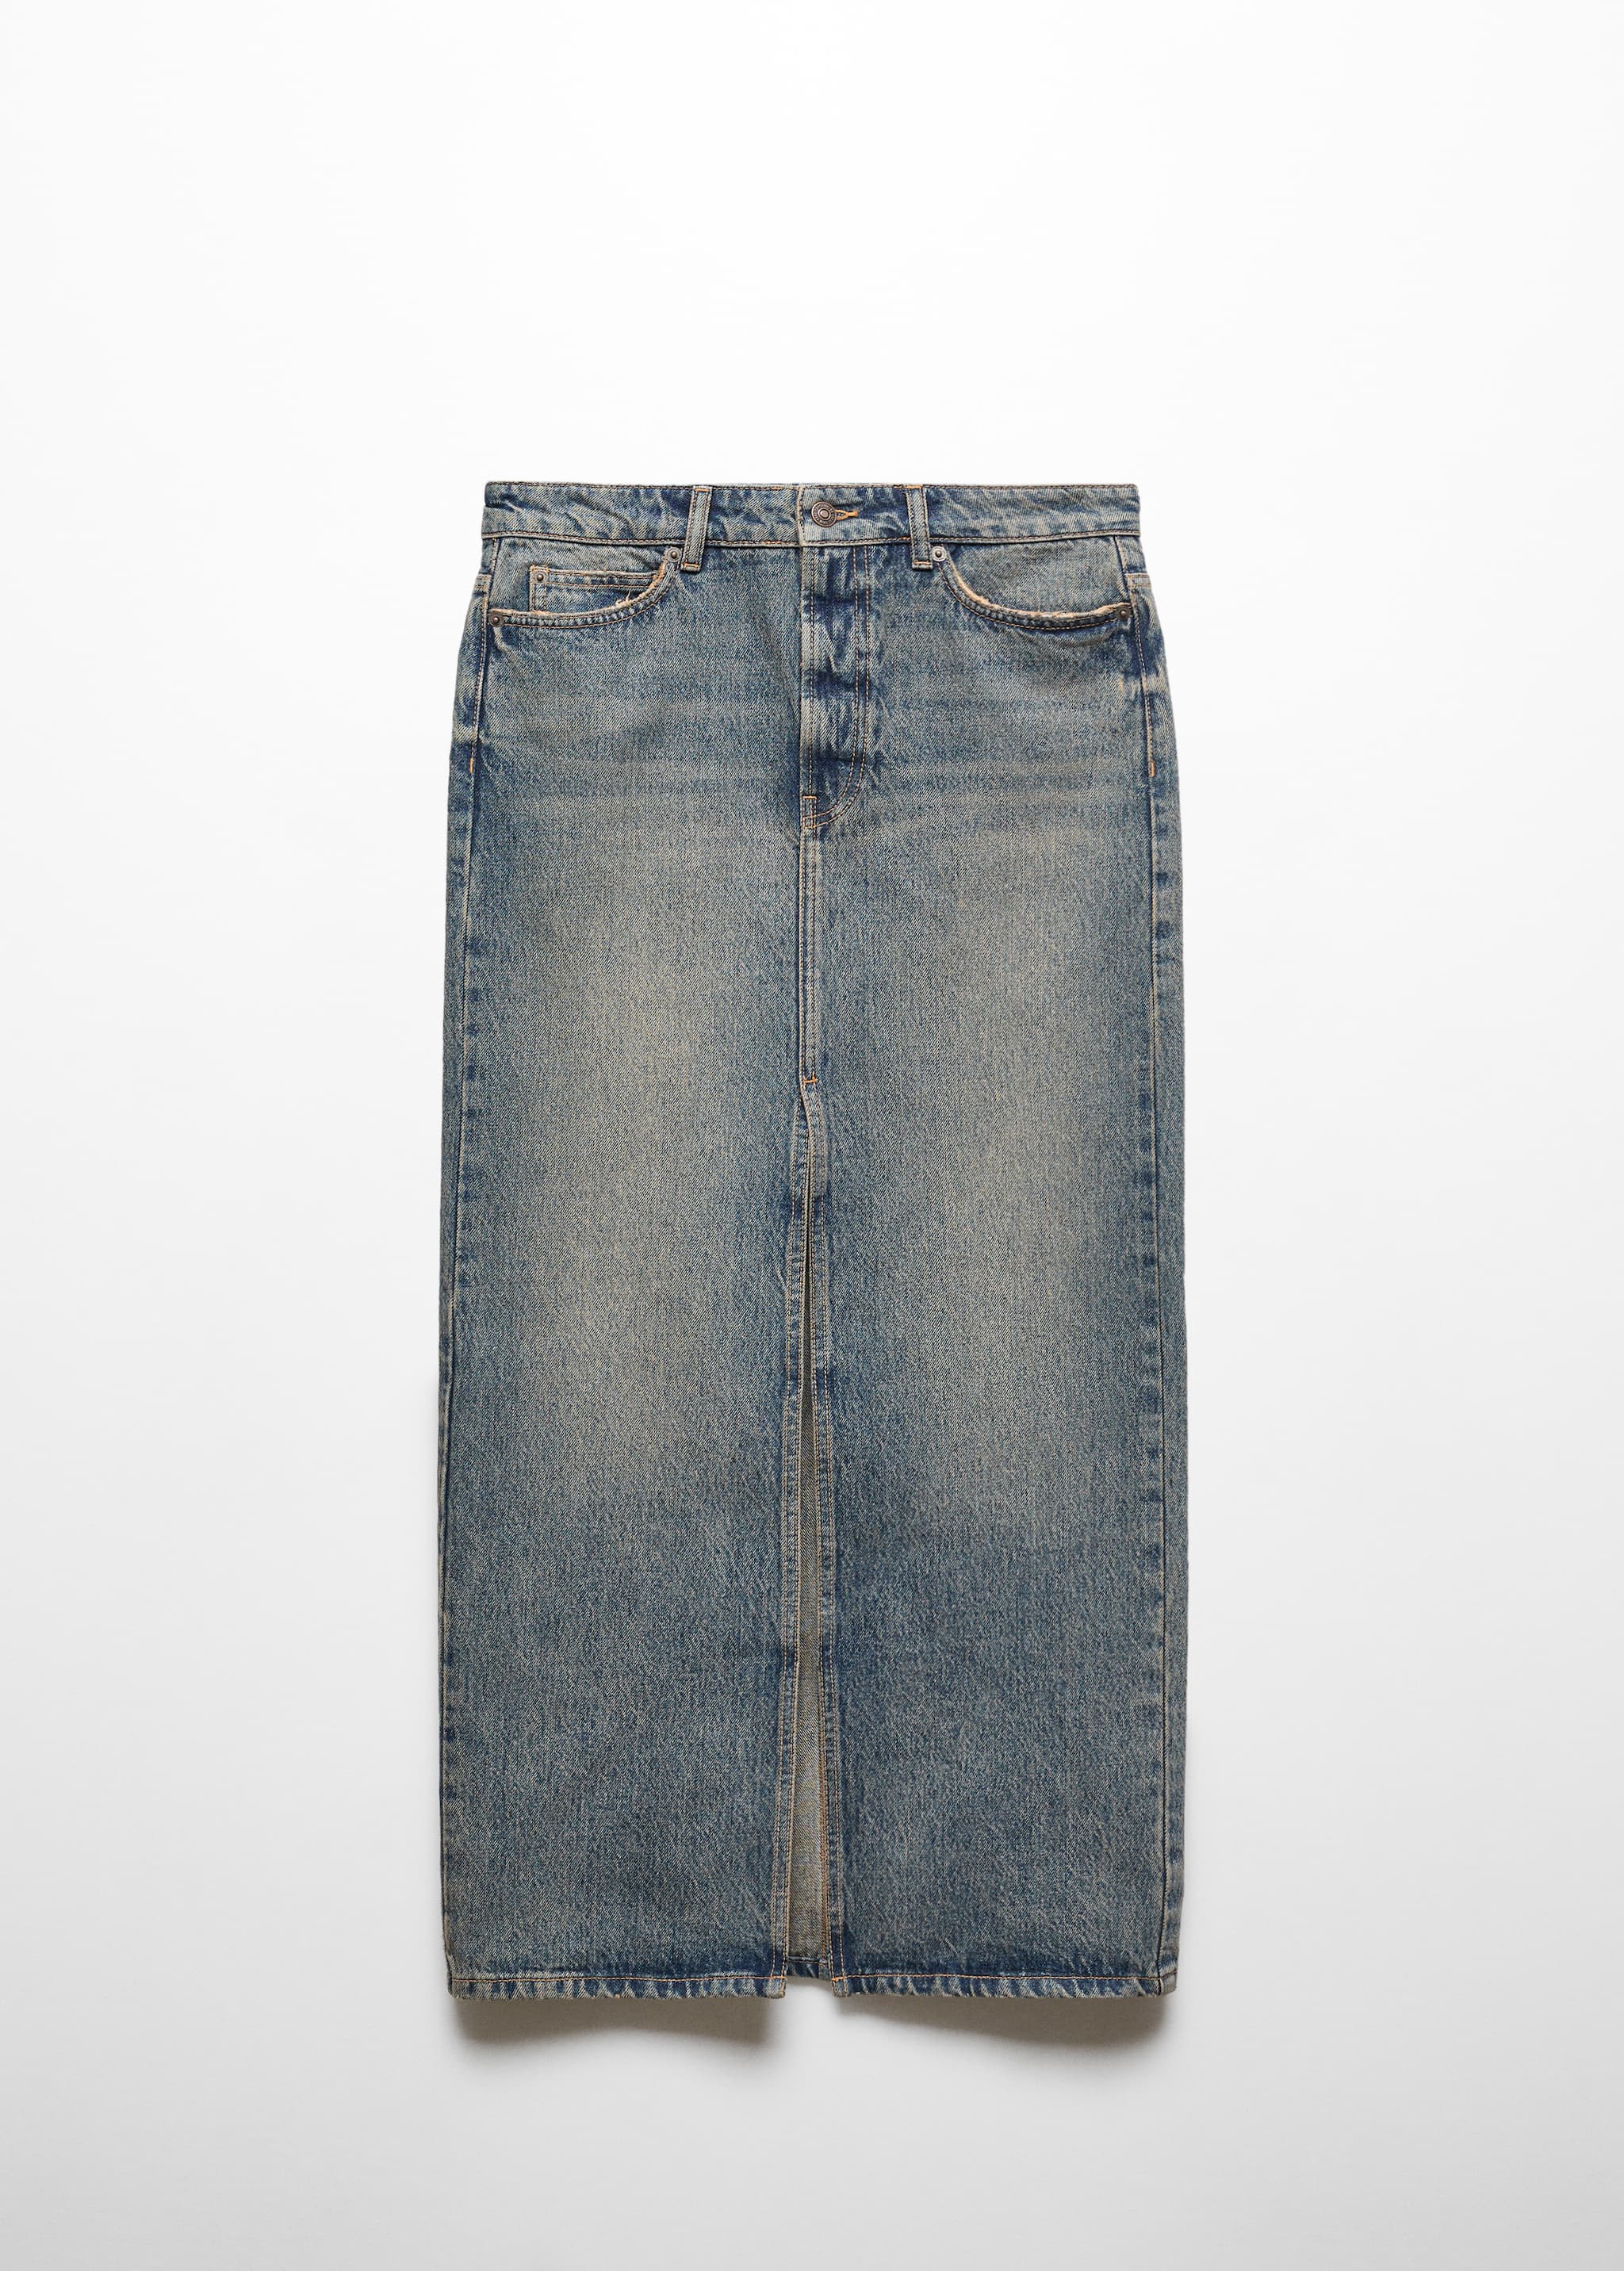 Long denim skirt - Article without model